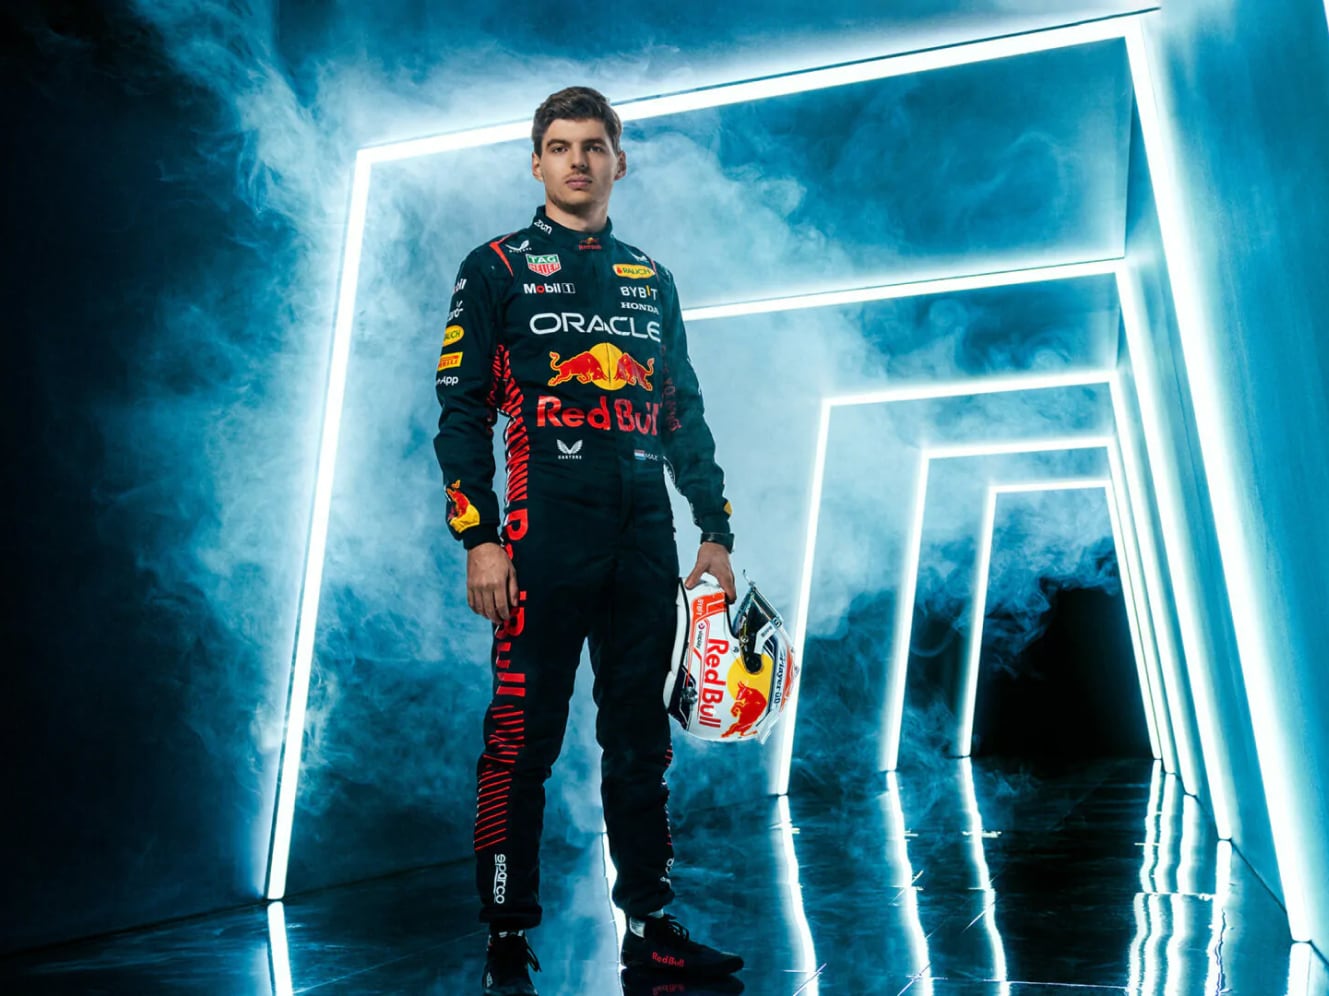 MAX MAKES IT THREE: ANOTHER RECORD-BREAKING SEASON FOR VERSTAPPEN